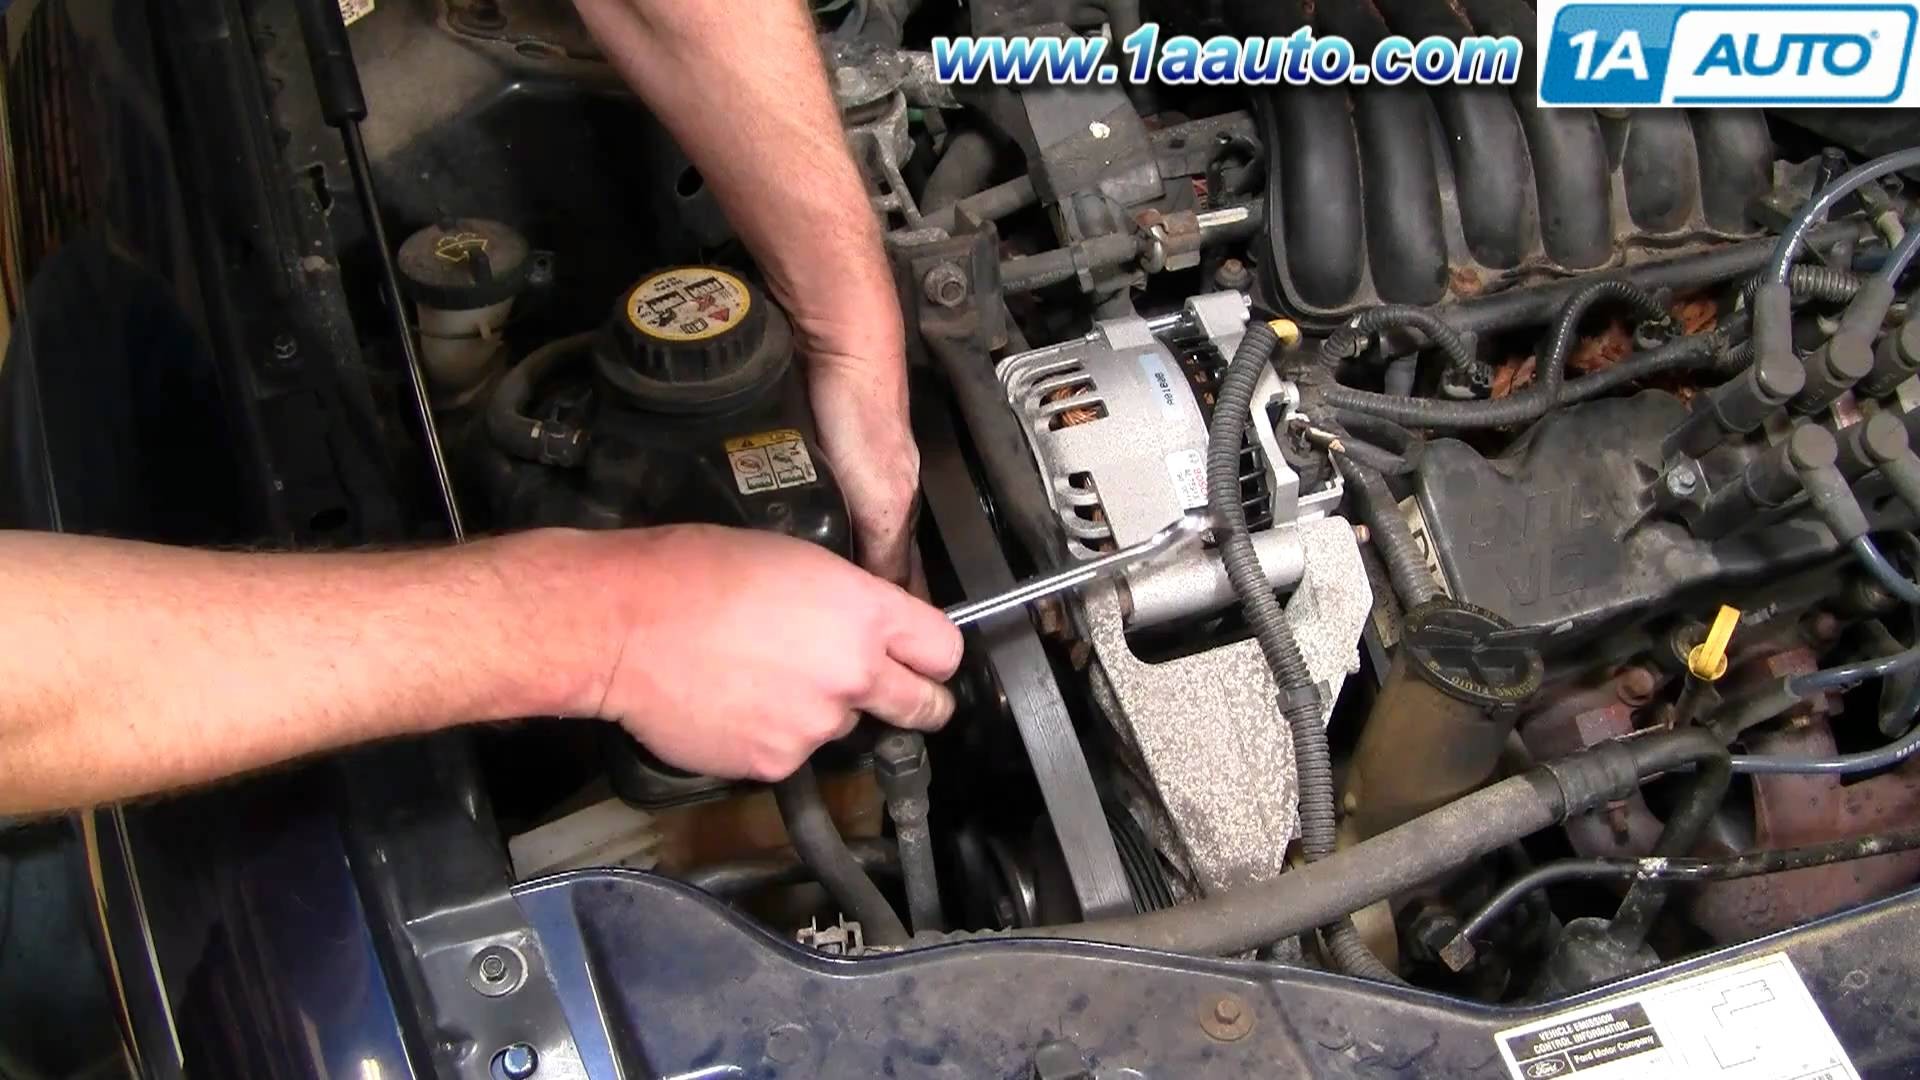 2006 ford Focus Engine Diagram How to Install Replace Serpentine Belt Idler Pulley ford Taurus 3 0l Of 2006 ford Focus Engine Diagram